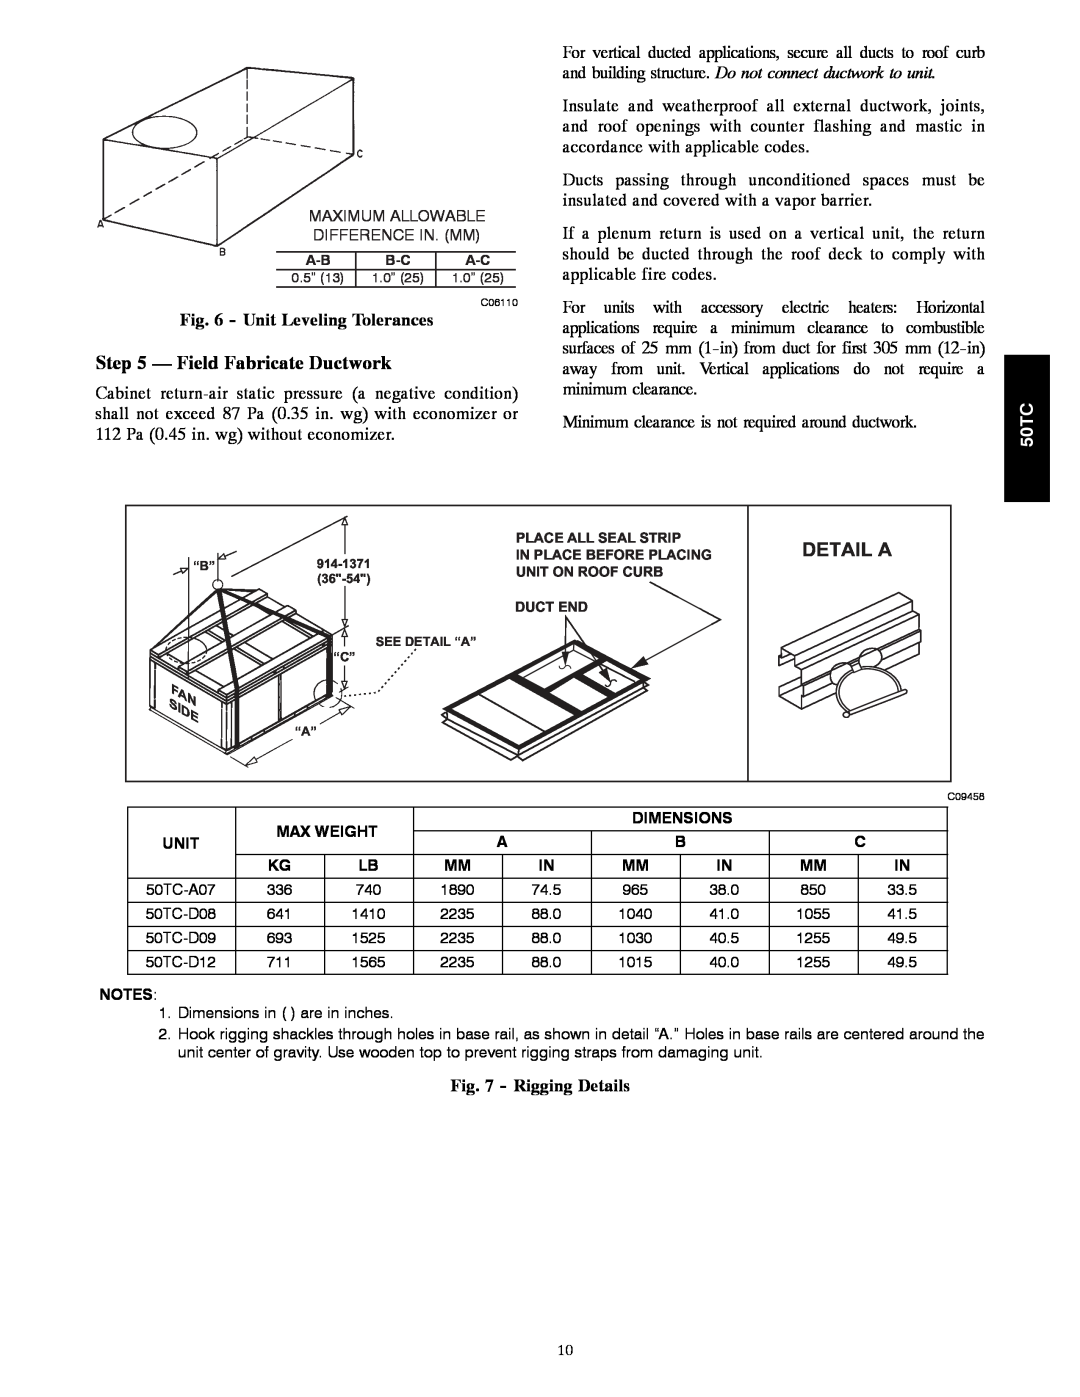 Carrier 50TC installation instructions Field Fabricate Ductwork, Unit Leveling Tolerances, Rigging Details, Detail A, Side 